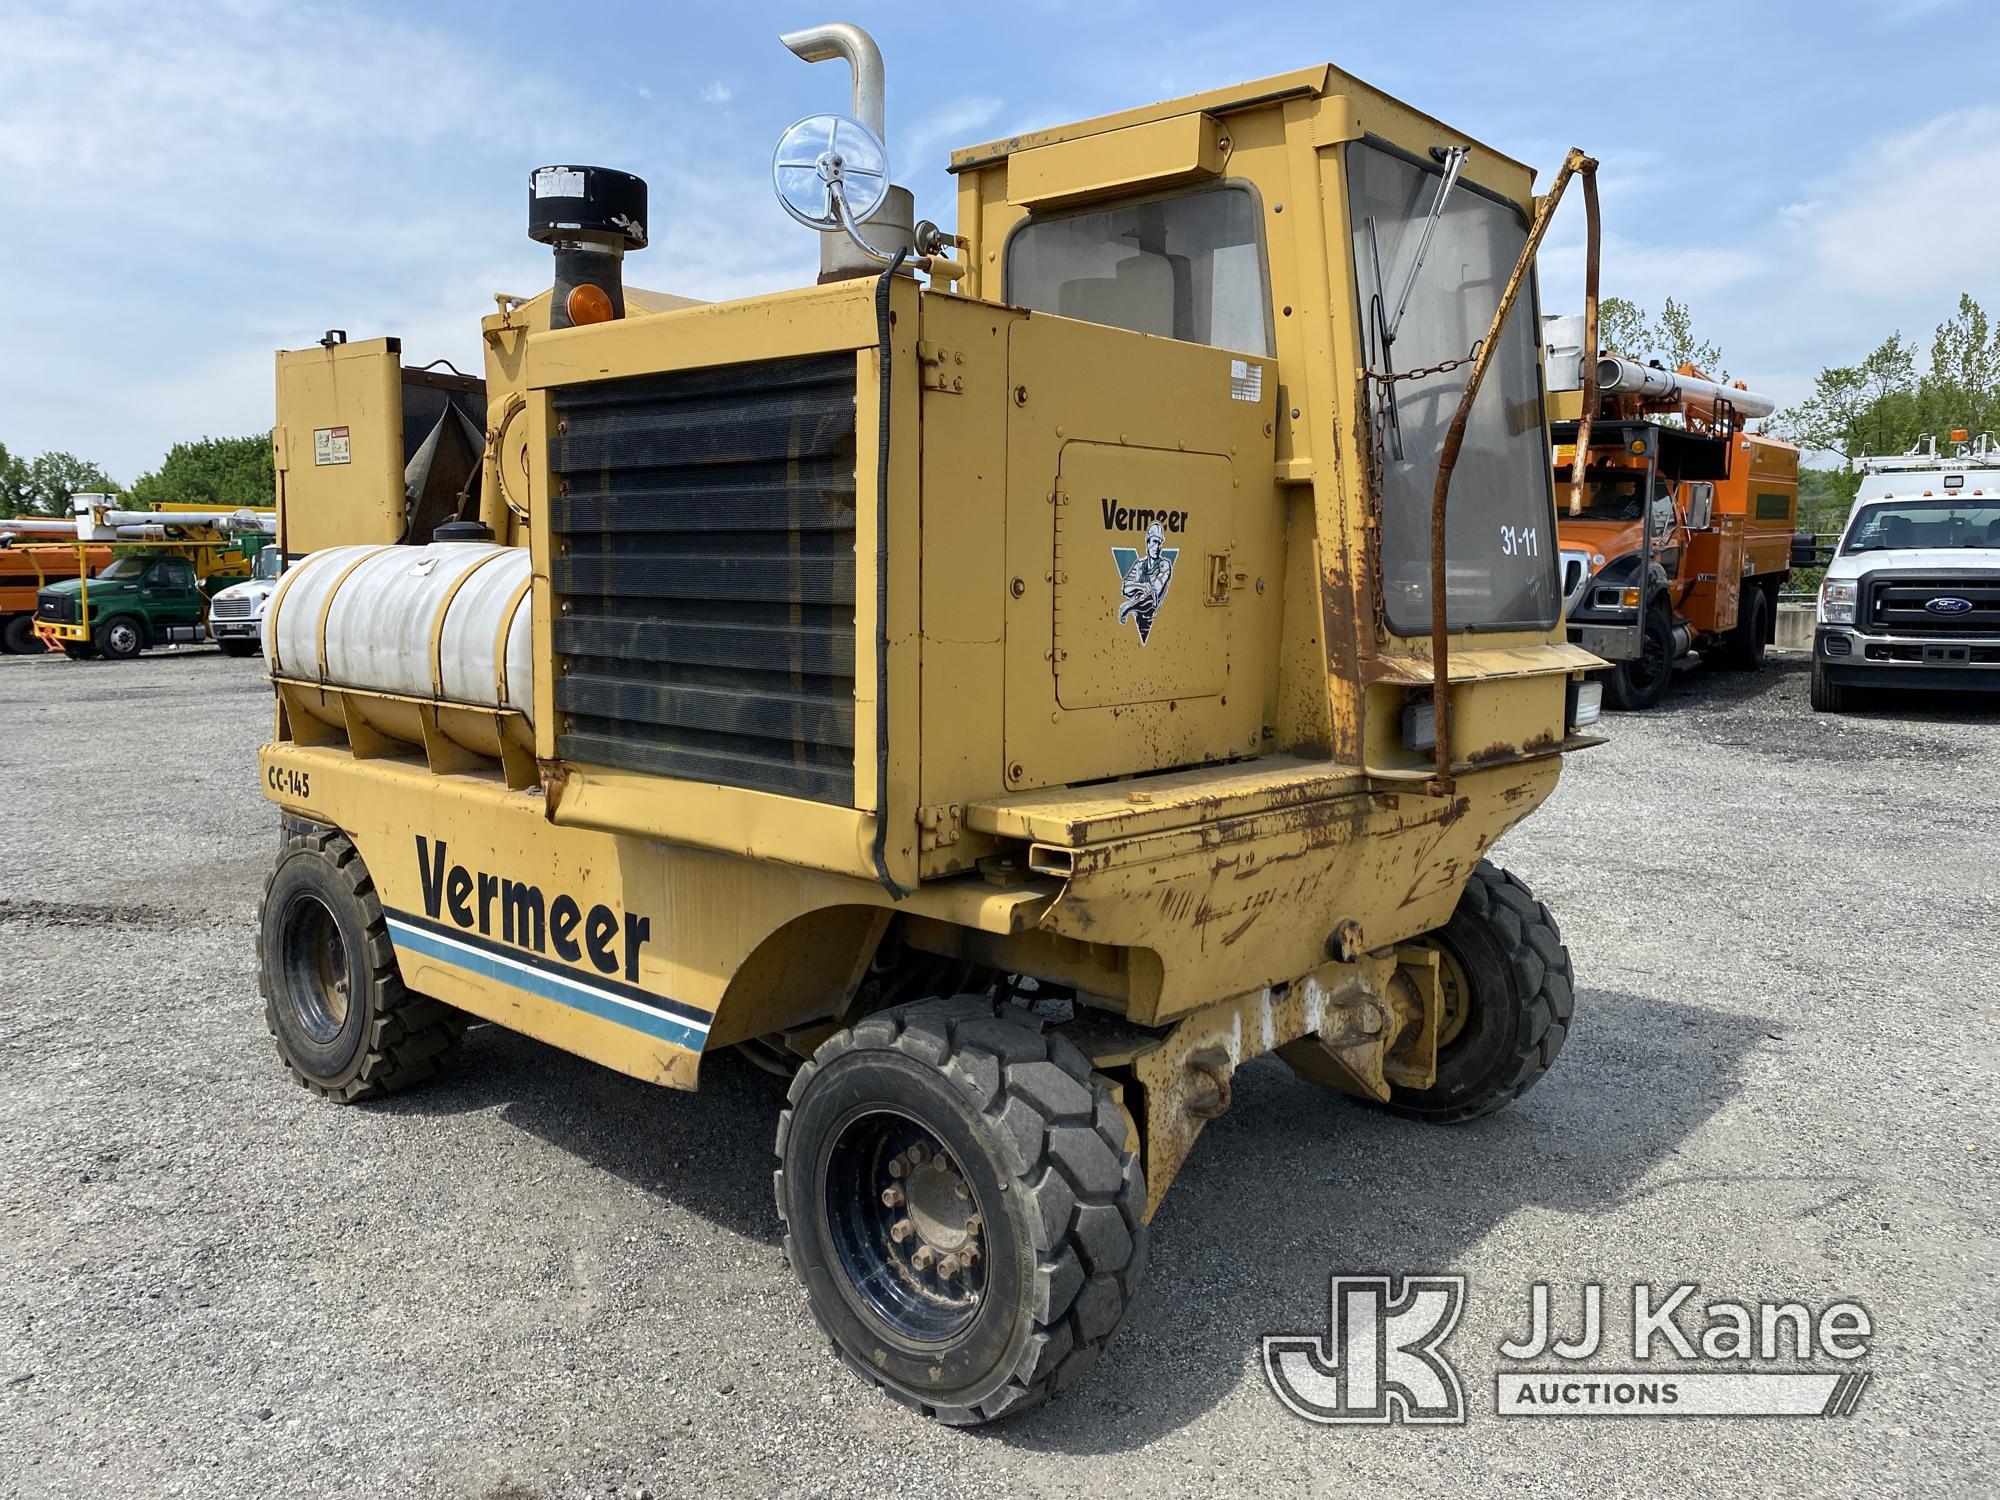 (Plymouth Meeting, PA) 1998 Vermeer CC145 Earth Saw Runs & Moves, Body & Rust Damage